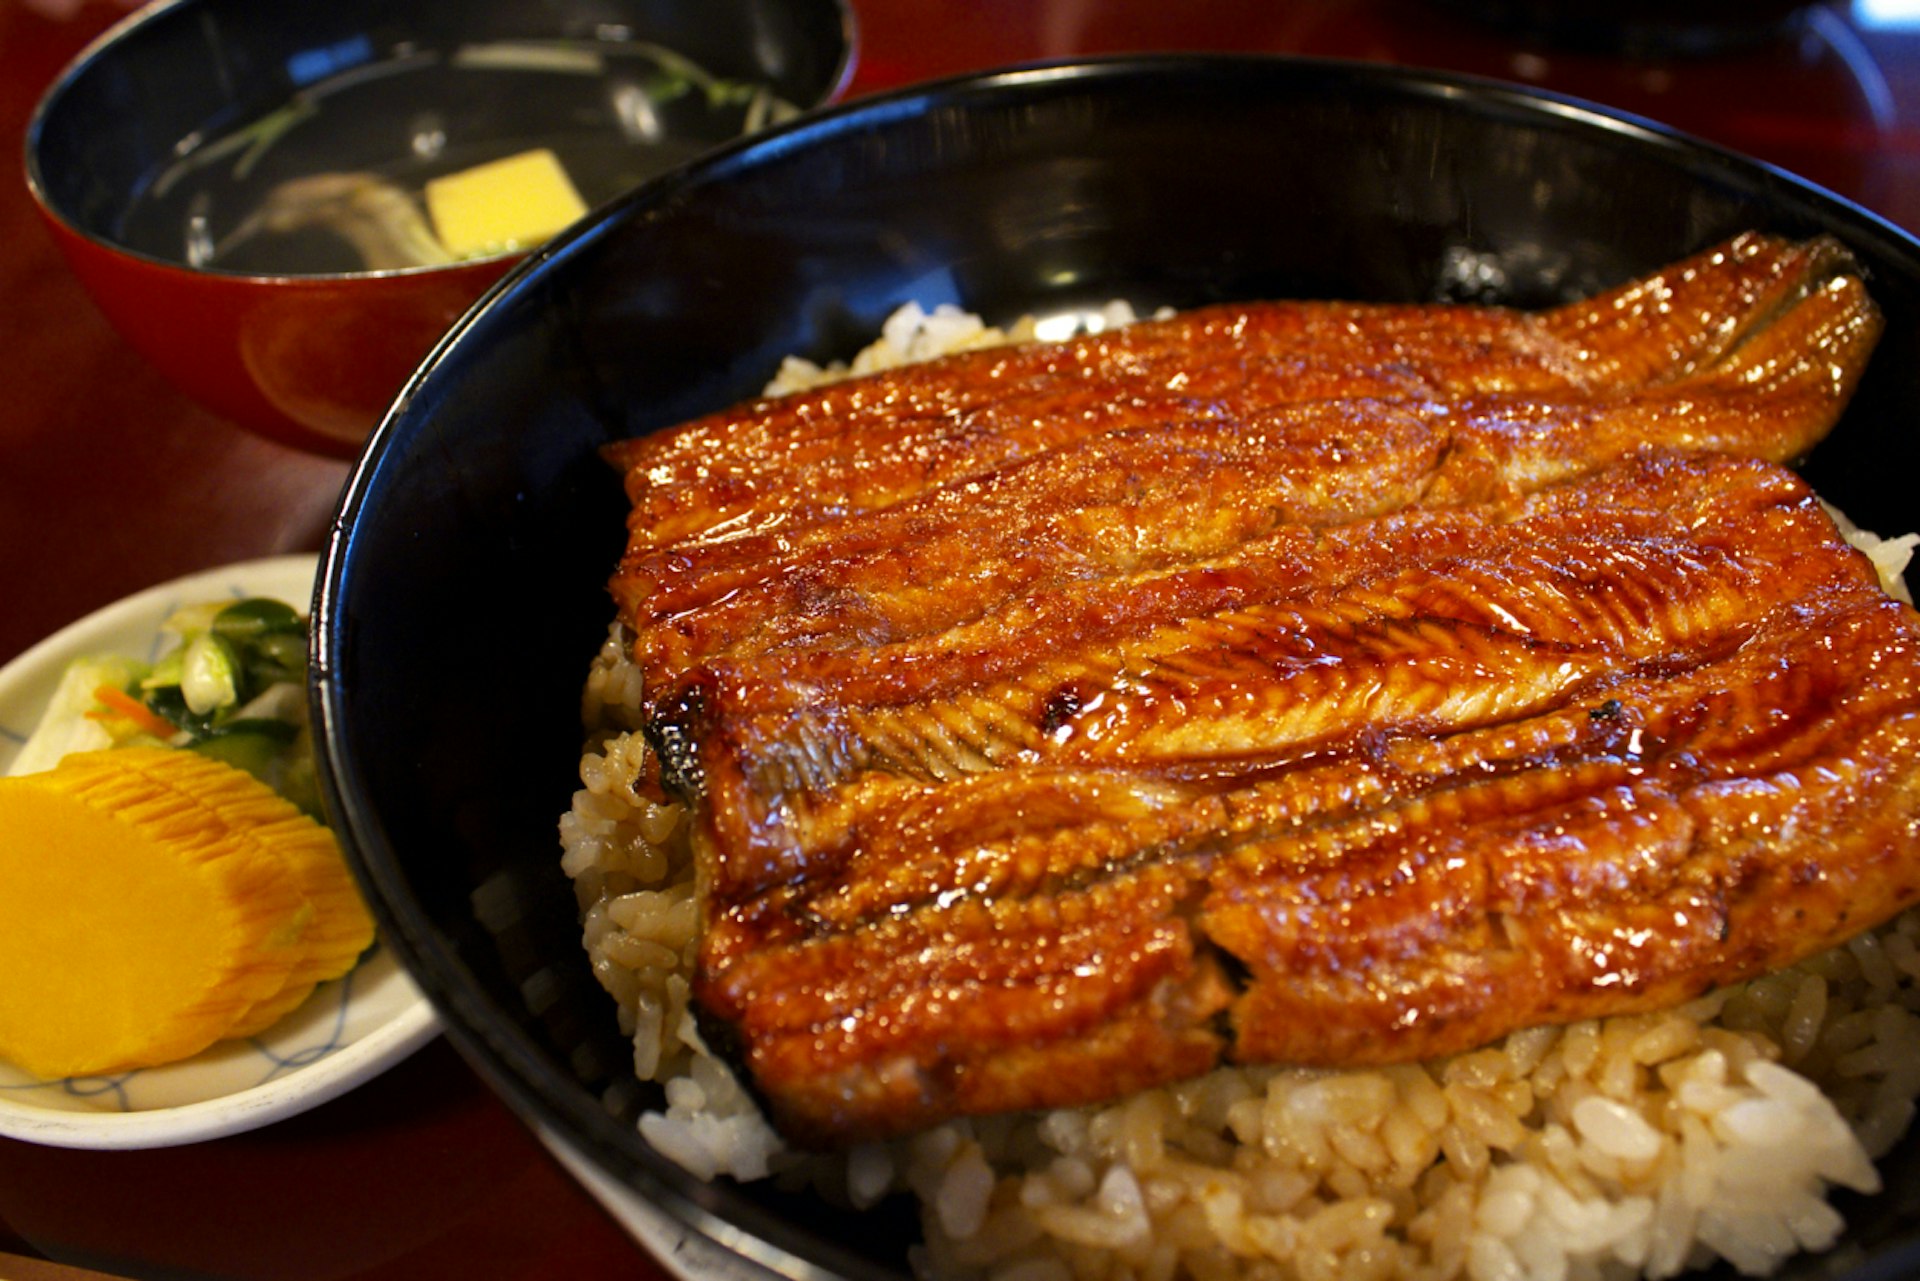 Traditional unagi dish. Photo by superstarjet / Getty Images.